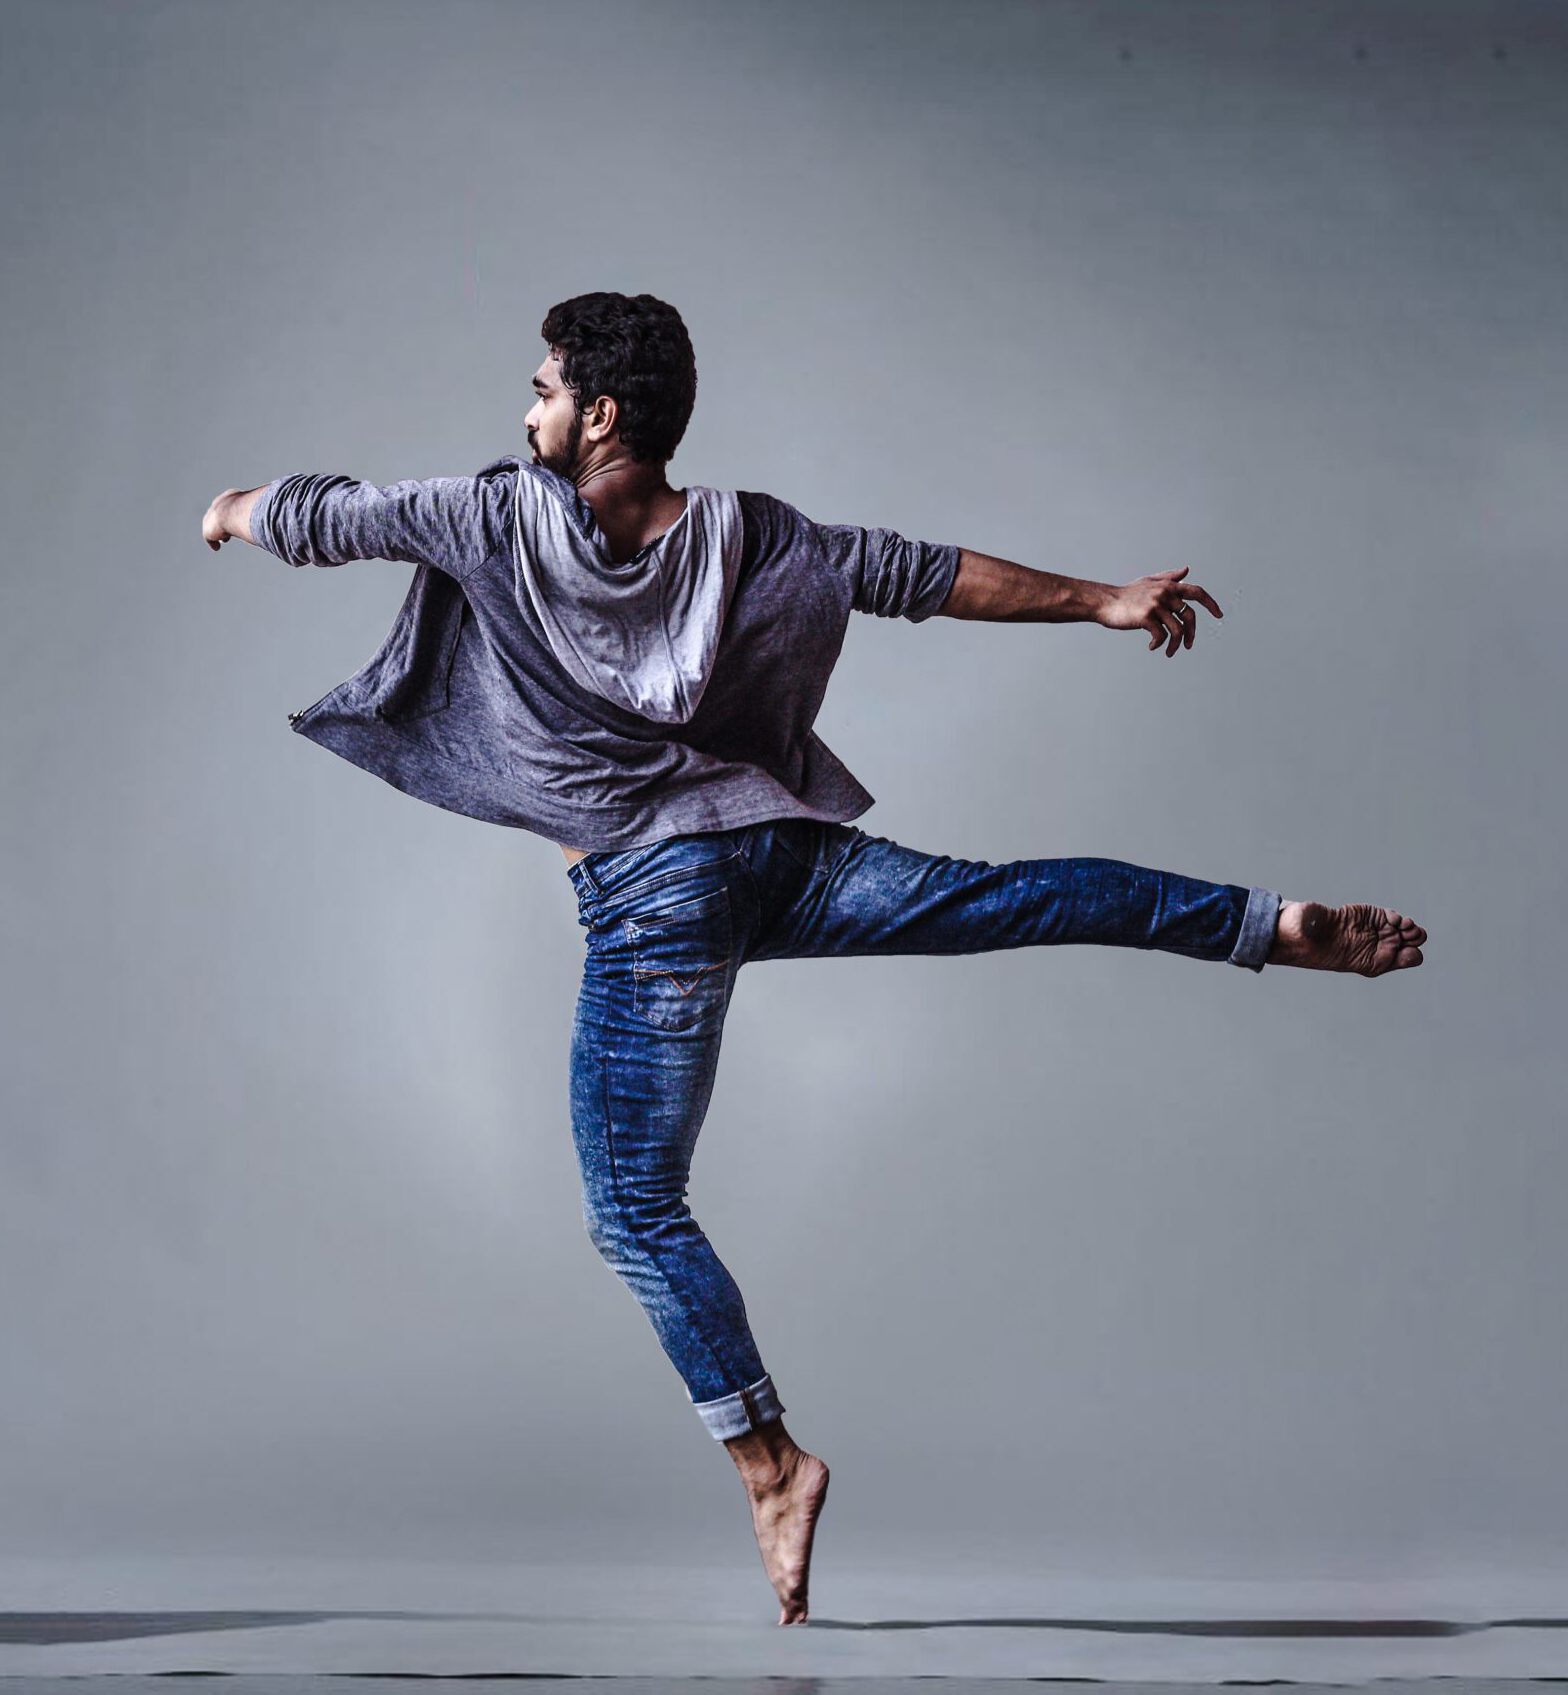 man-wearing-blue-jeans-doing-pirouette-spin-1701202